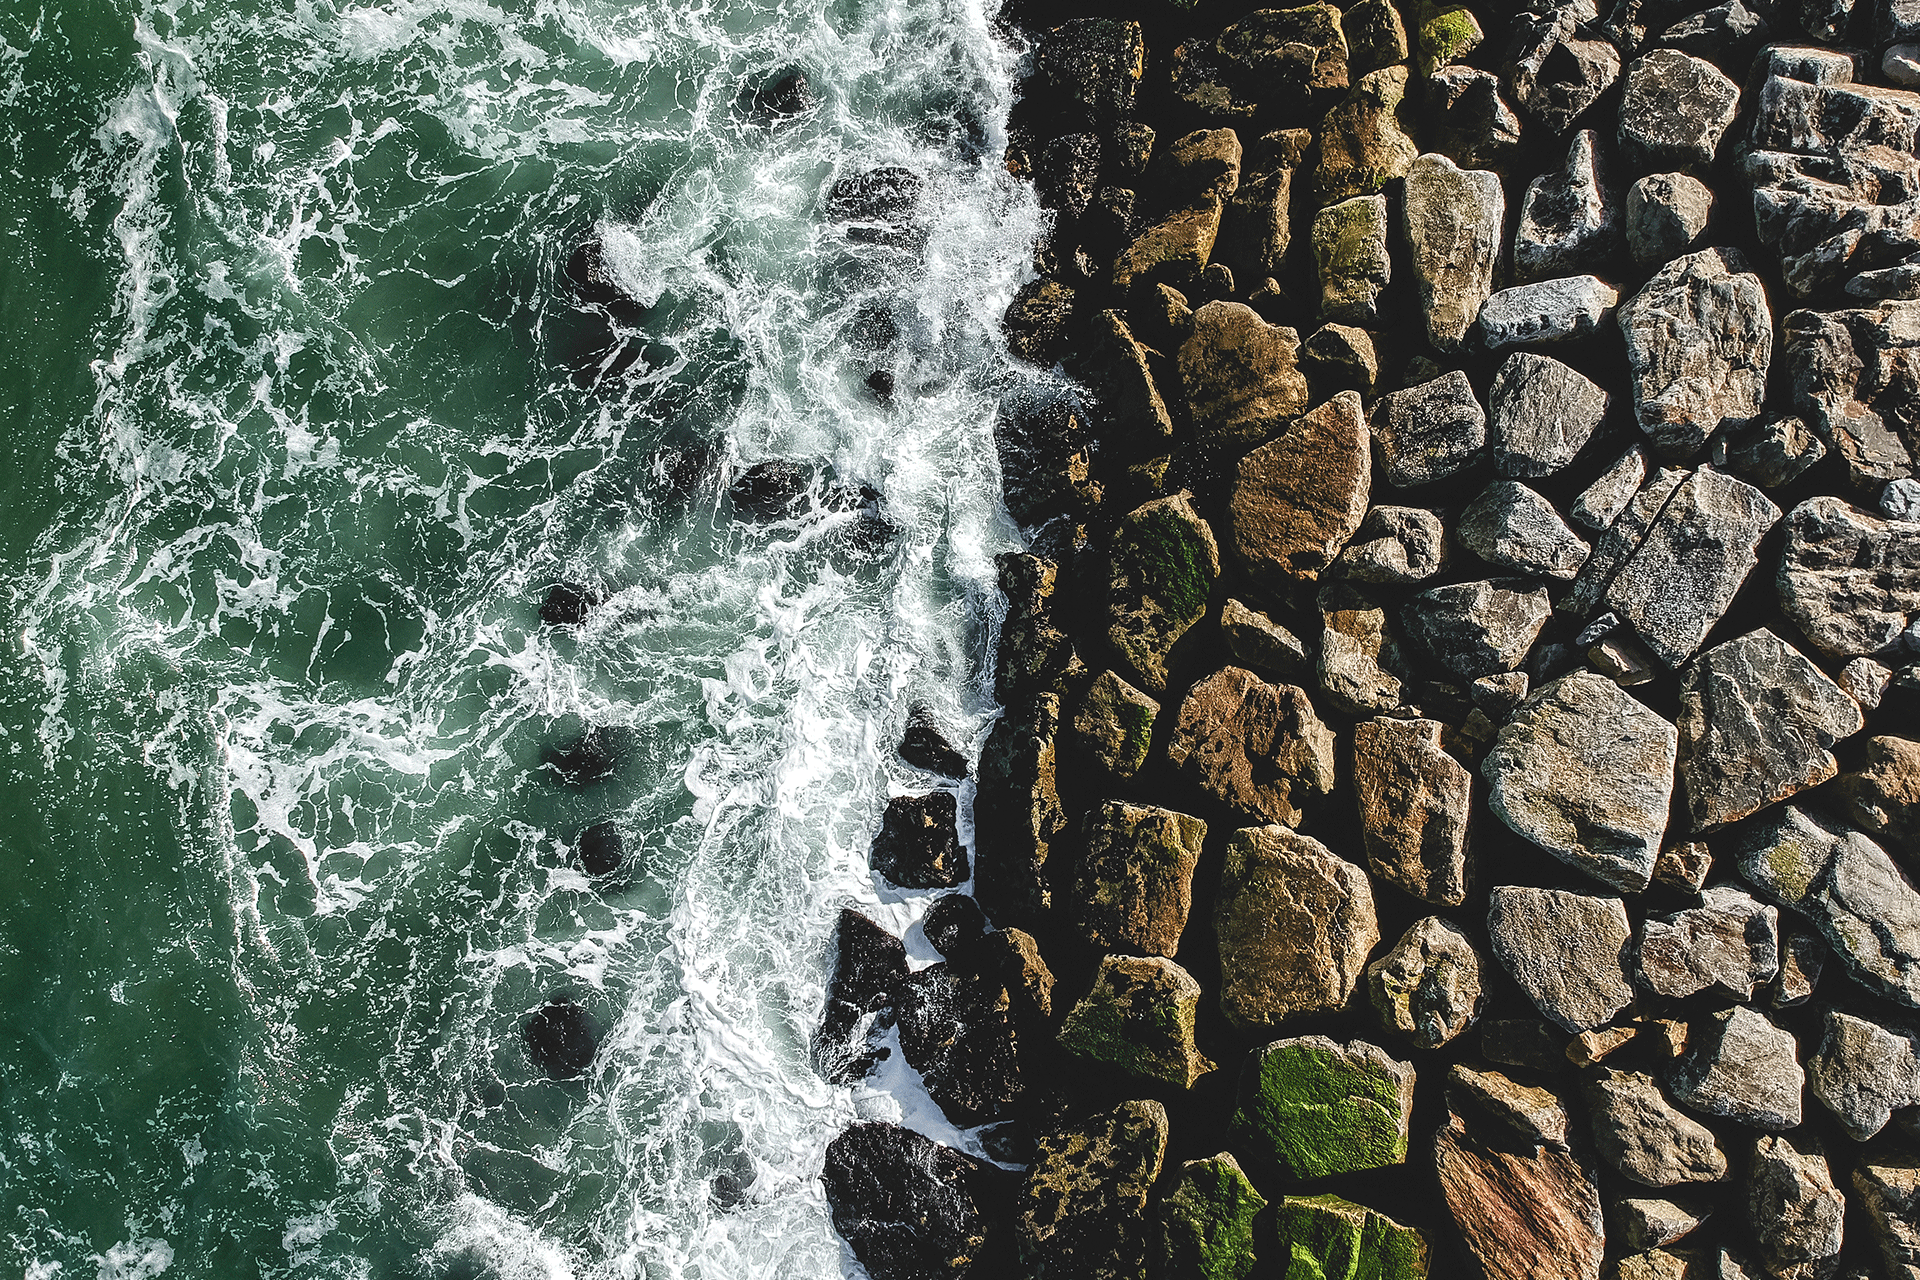 View from above of waves crashing against a built-up rock wall - symbolic of Quality Investing.